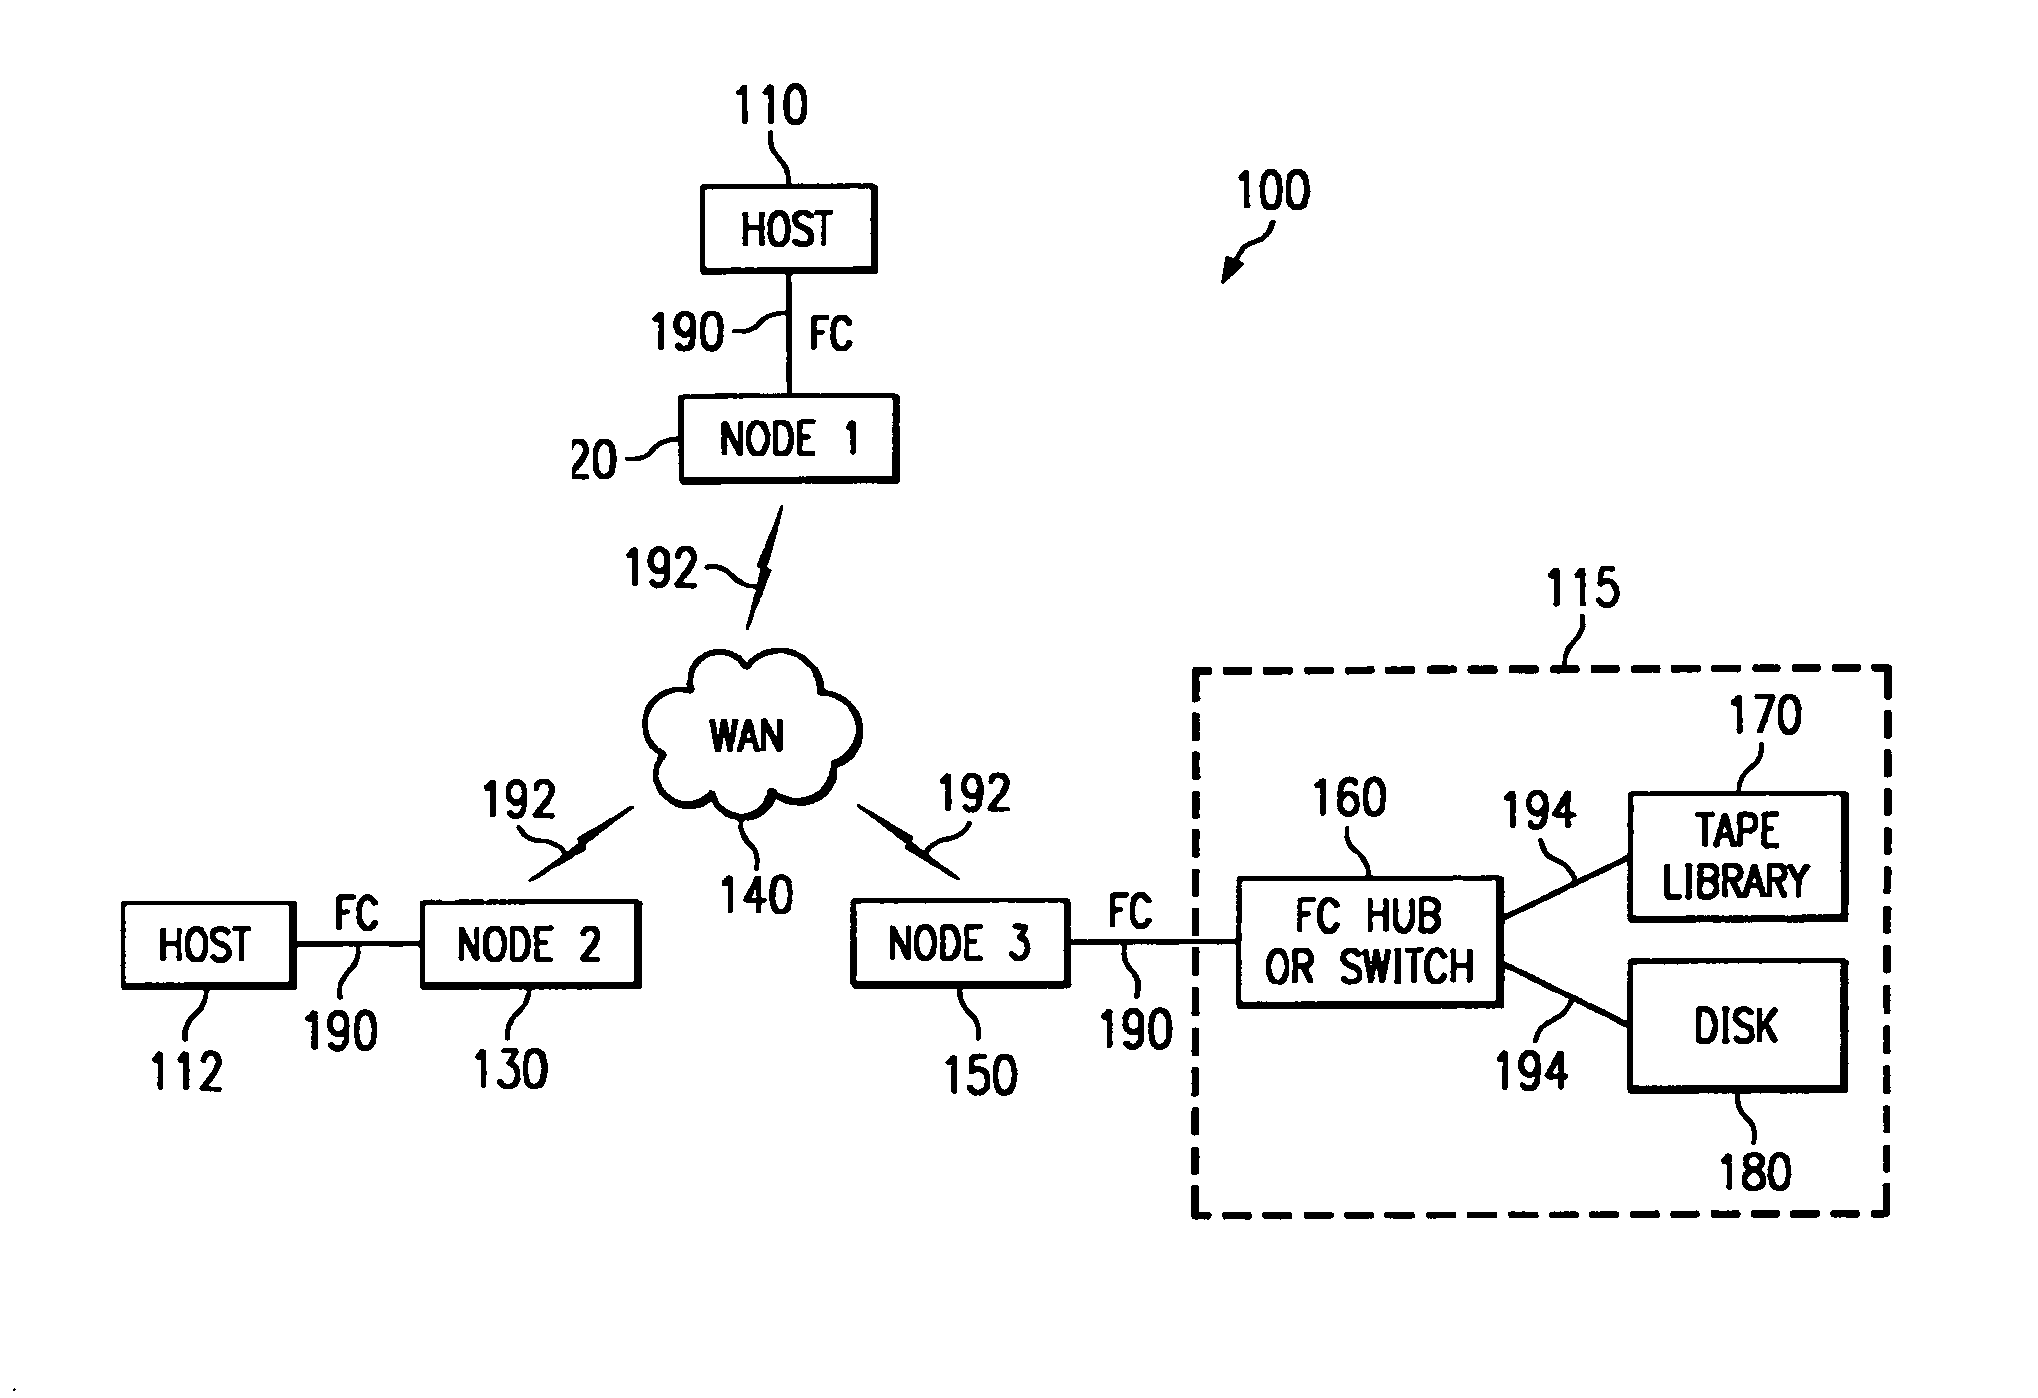 Encapsulation protocol for linking storage area networks over a packet-based network